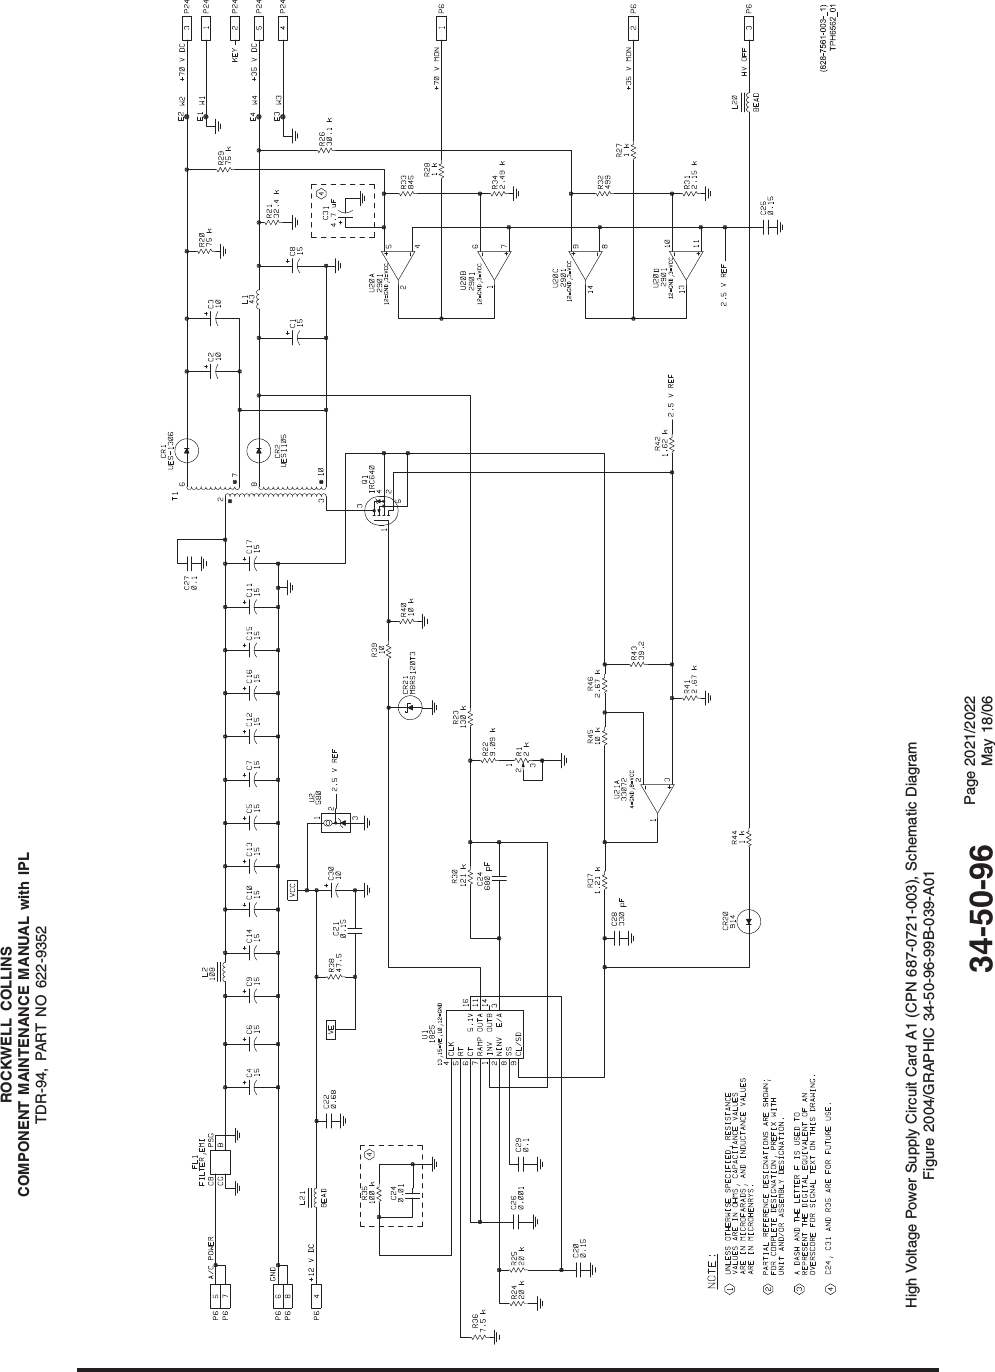 ROCKWELL COLLINSCOMPONENT MAINTENANCE MANUAL with IPLTDR-94, PART NO 622-9352High Voltage Power Supply Circuit Card A1 (CPN 687-0721-003), Schematic DiagramFigure 2004/GRAPHIC 34-50-96-99B-039-A0134-50-96 Page 2021/2022May 18/06